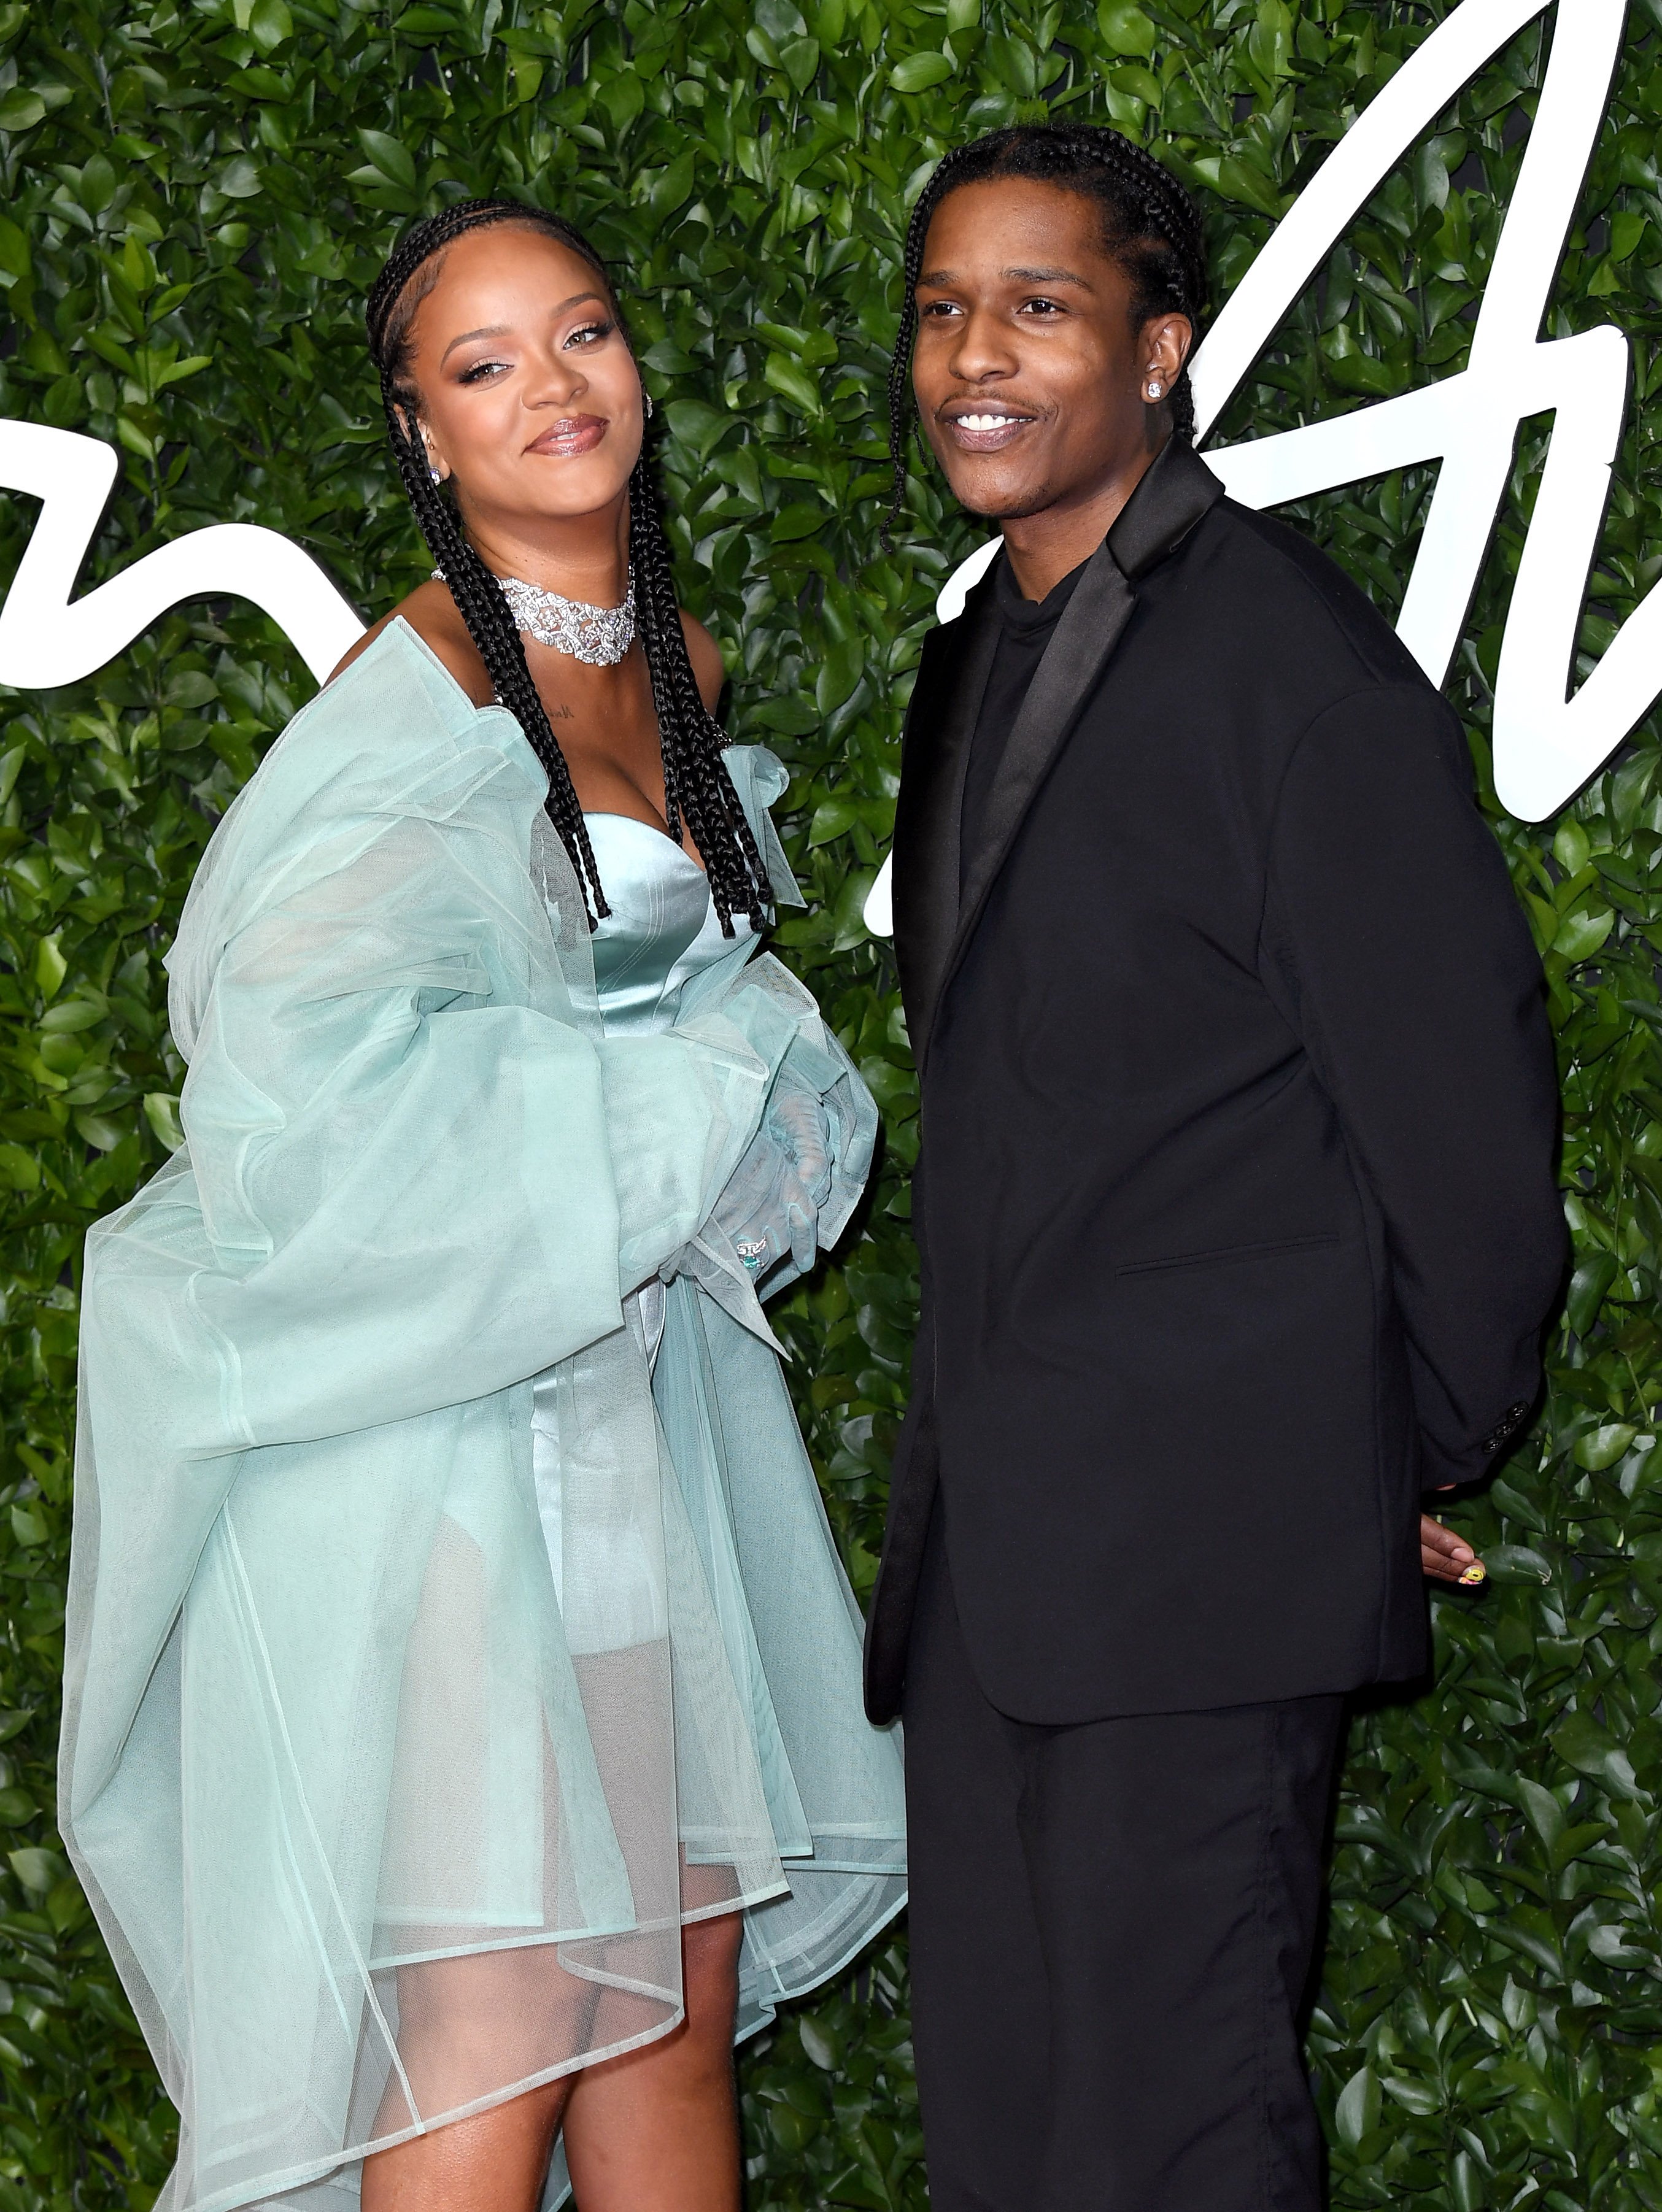 Rihanna and A$AP Rocky pose at The Fashion Awards 2019 at the Royal Albert Hall on December 02, 2019 in London, England. | Source: Getty Images